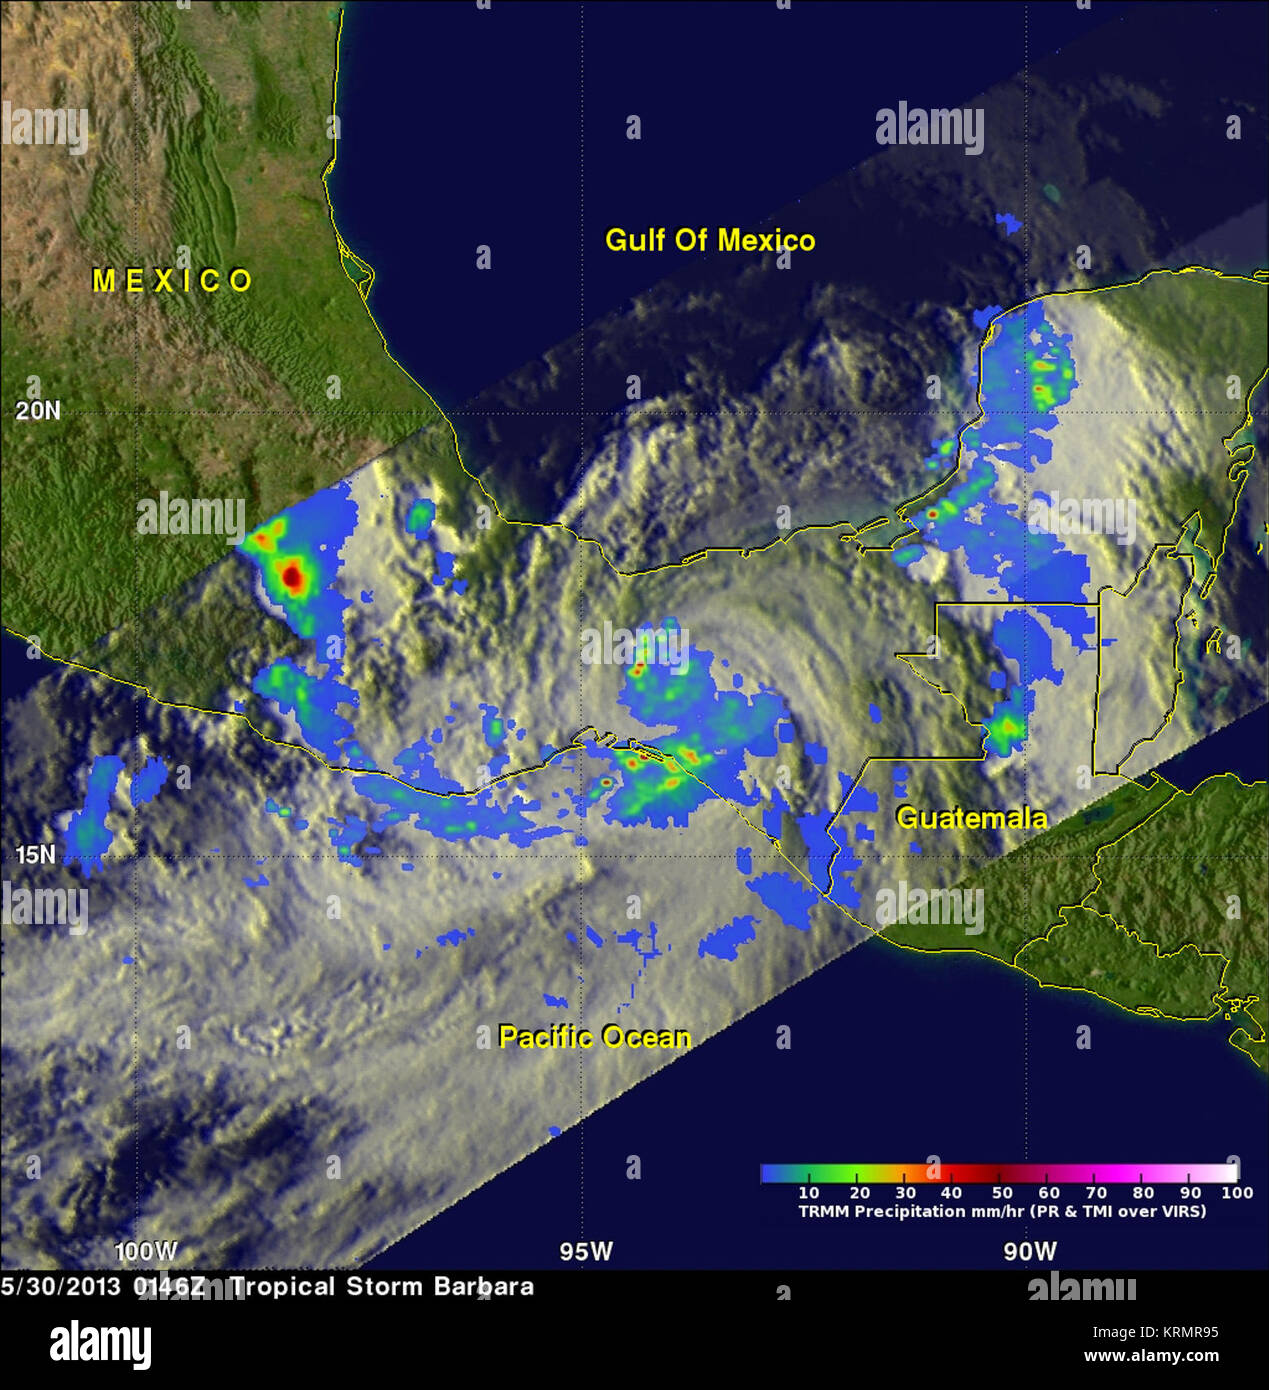 TRMM captured this image of Hurricane Barbara several hours after it made landfall. The image was taken at 6:46 p.m. PDT on May 29 (01:46 UTC 30 May) 2013 and shows the horizontal distribution of rain intensity within the storm. The image shows no evidence of an eye and areas of mostly light (blue) to moderate (green) rain within the storm. Localized areas of heavier rain are evident inland northwest of the center and along the coast where the storm's circulation is drawing moist air ashore.   Credit: NASA/SSAI, Hal Pierce   ----  NASA Satellites See Hurricane Barbara Come Ashore and Fizzle  H Stock Photo